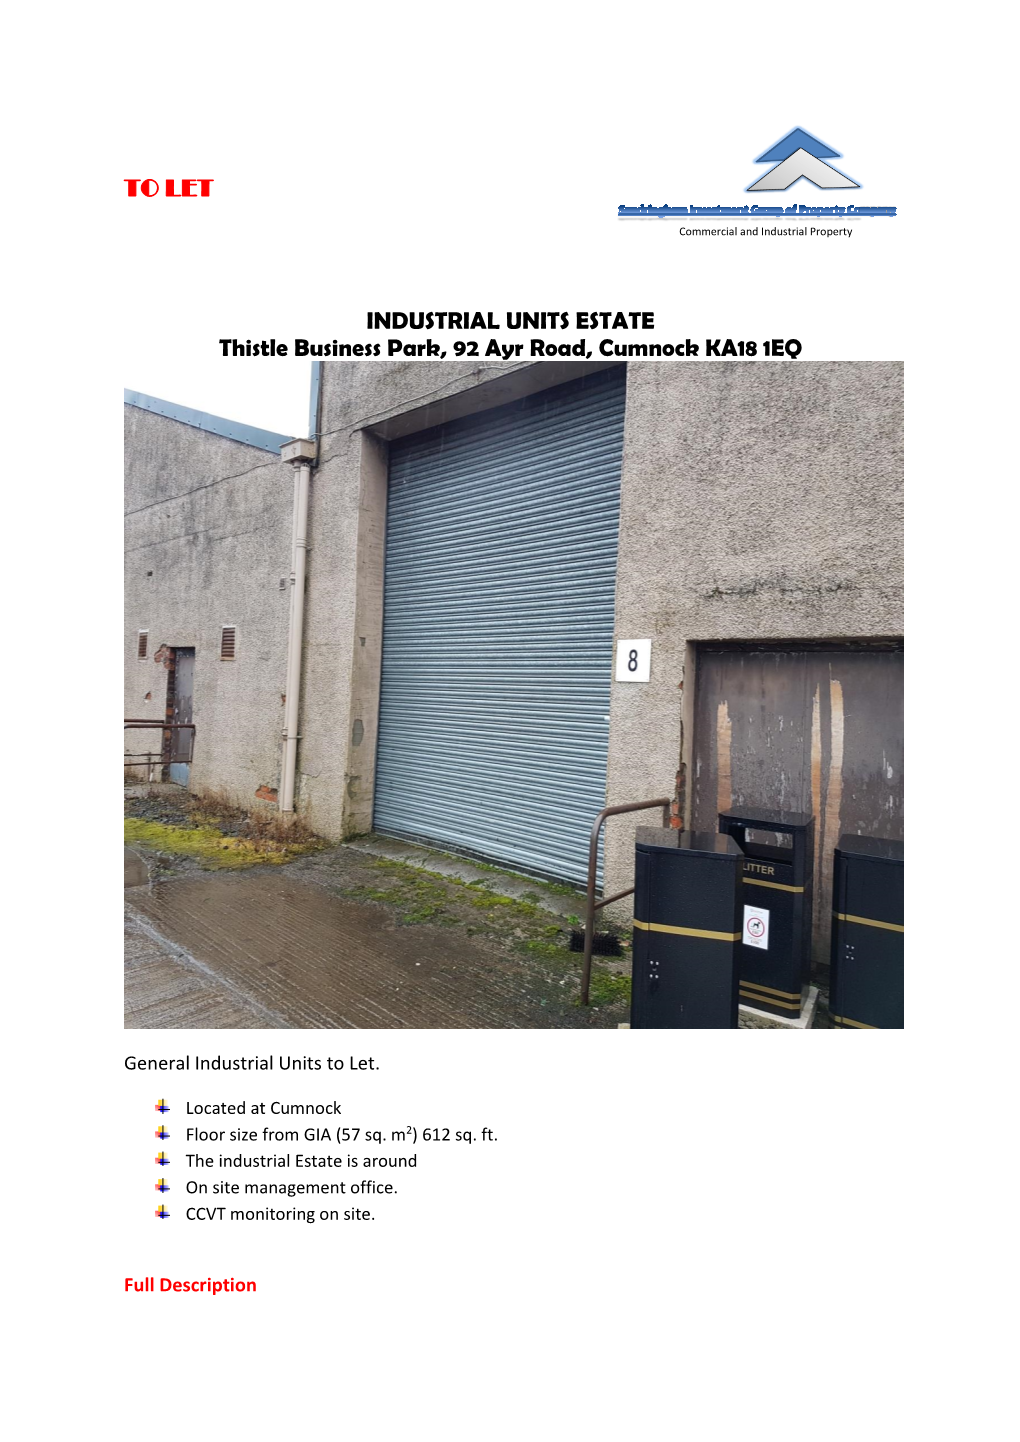 TO LET INDUSTRIAL UNITS ESTATE Thistle Business Park, 92 Ayr Road